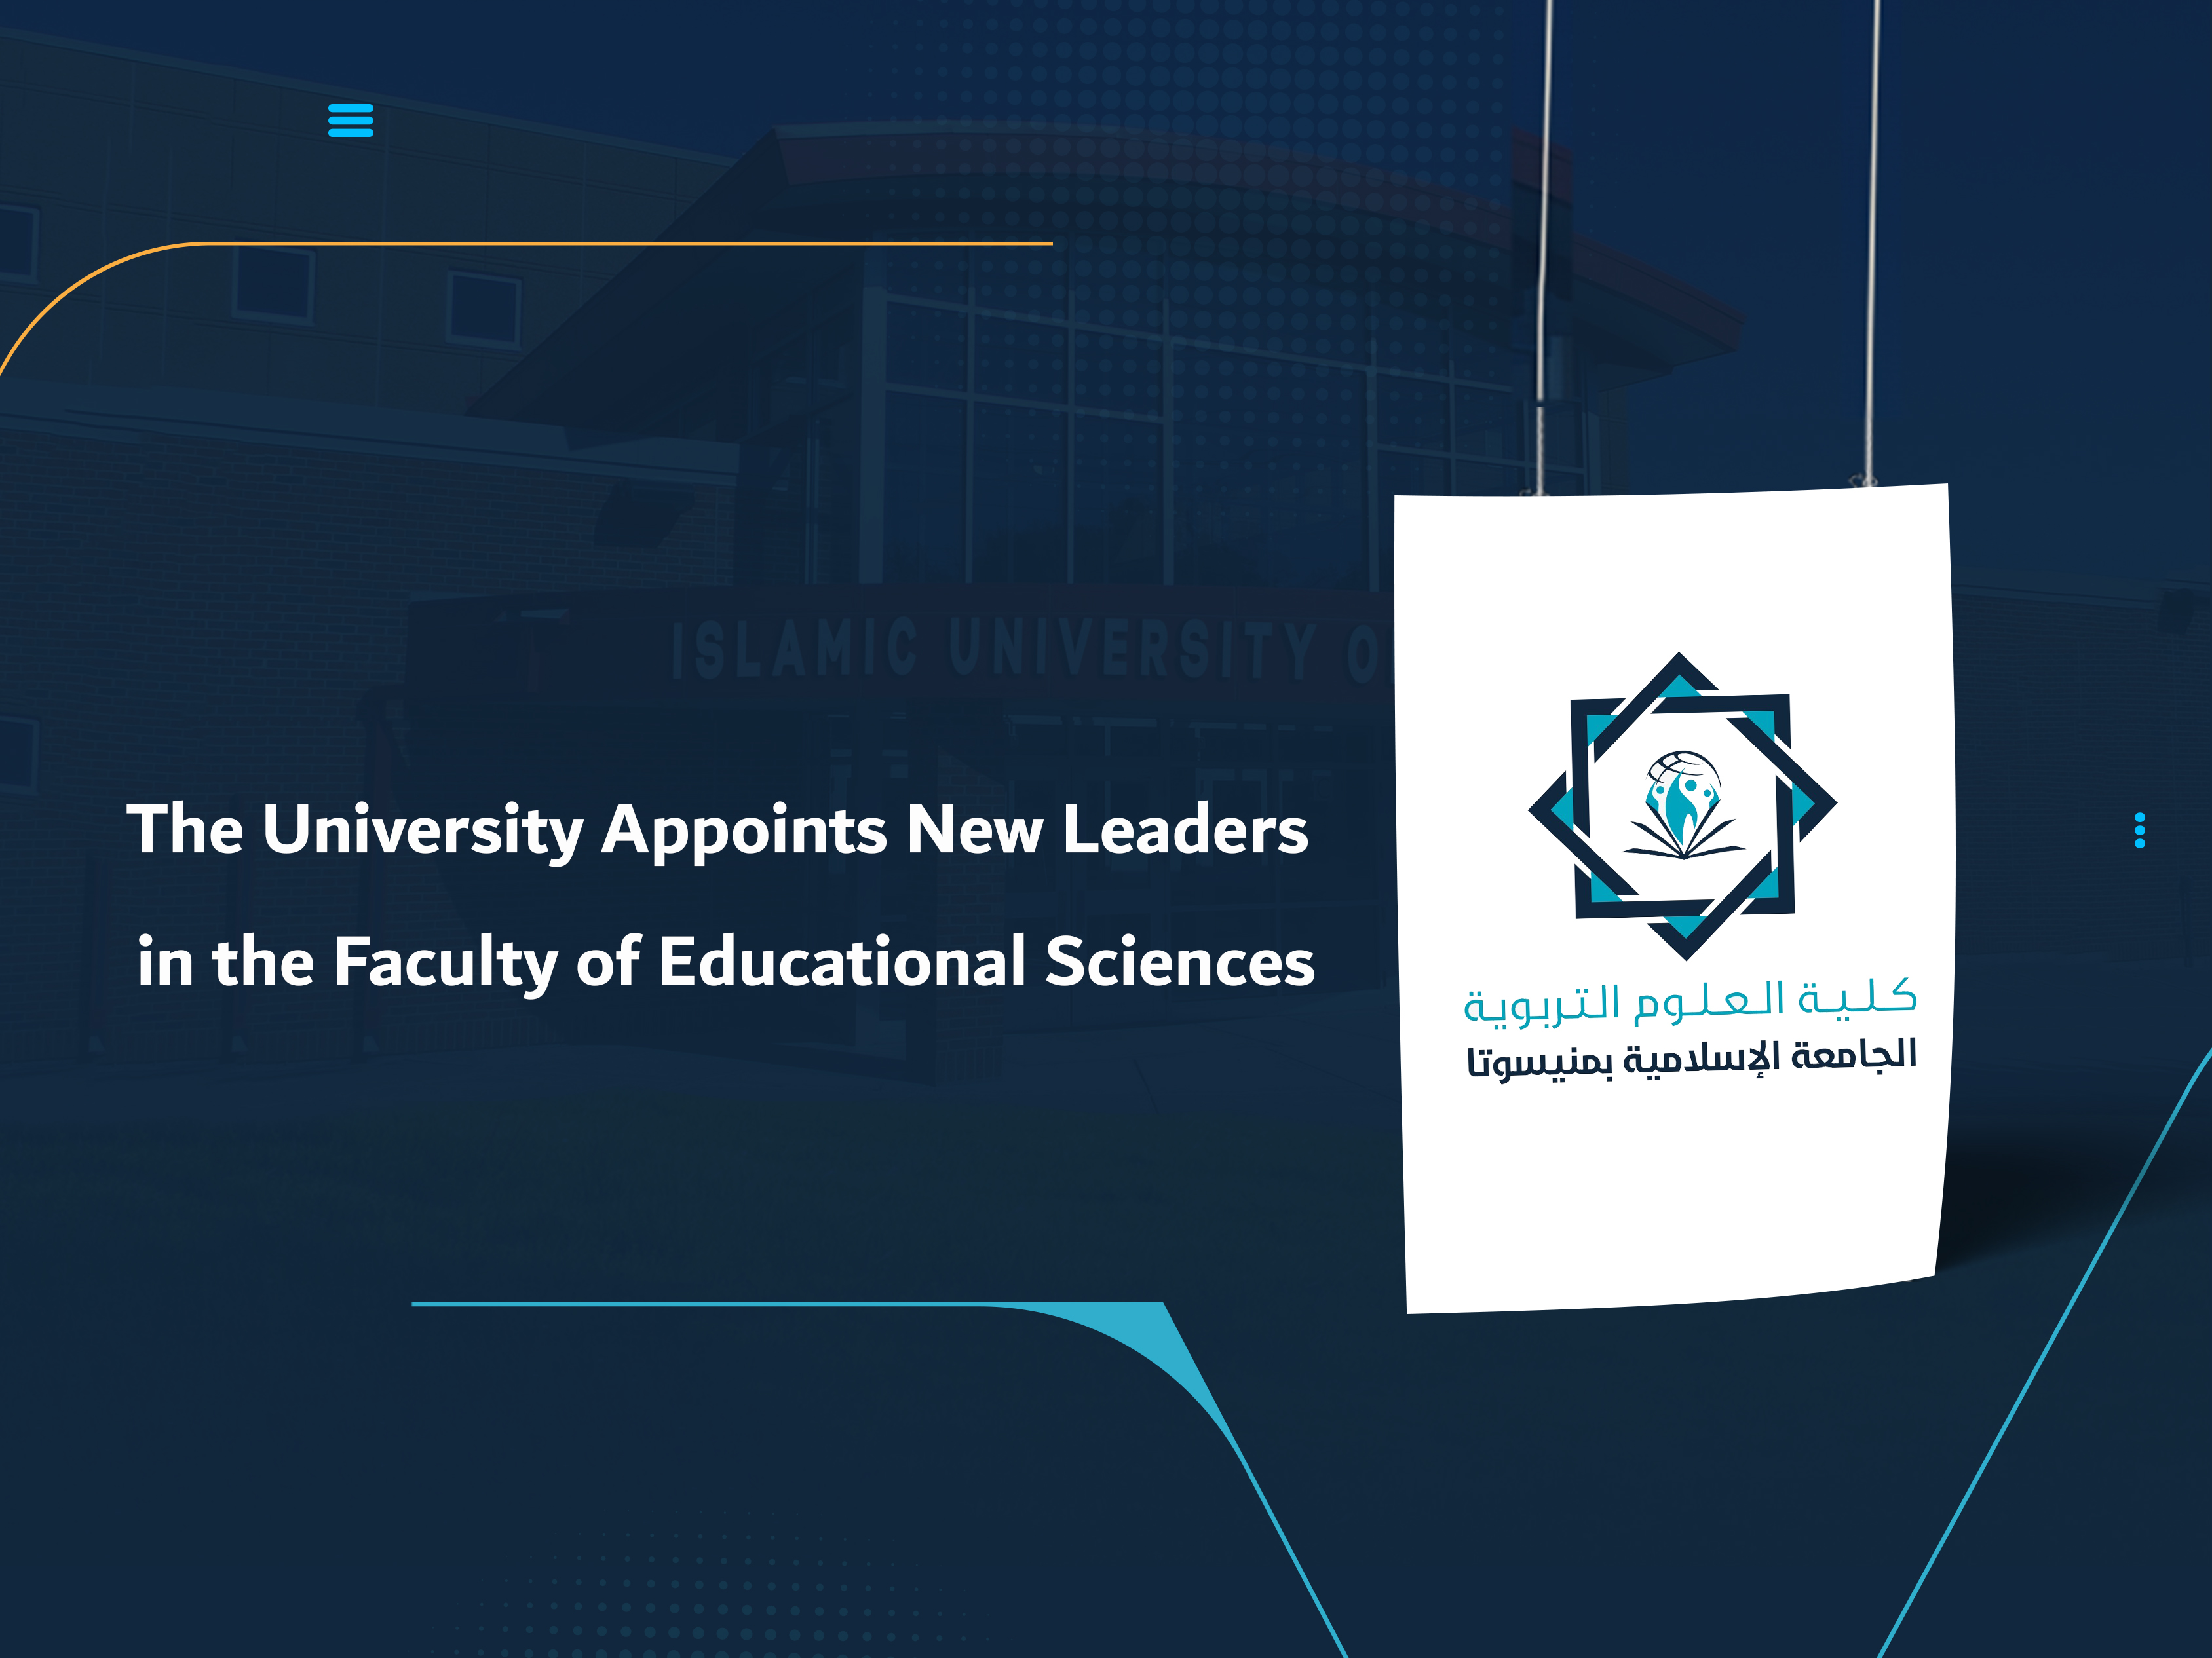 The University Appoints New Leaders in the Faculty of Educational Sciences